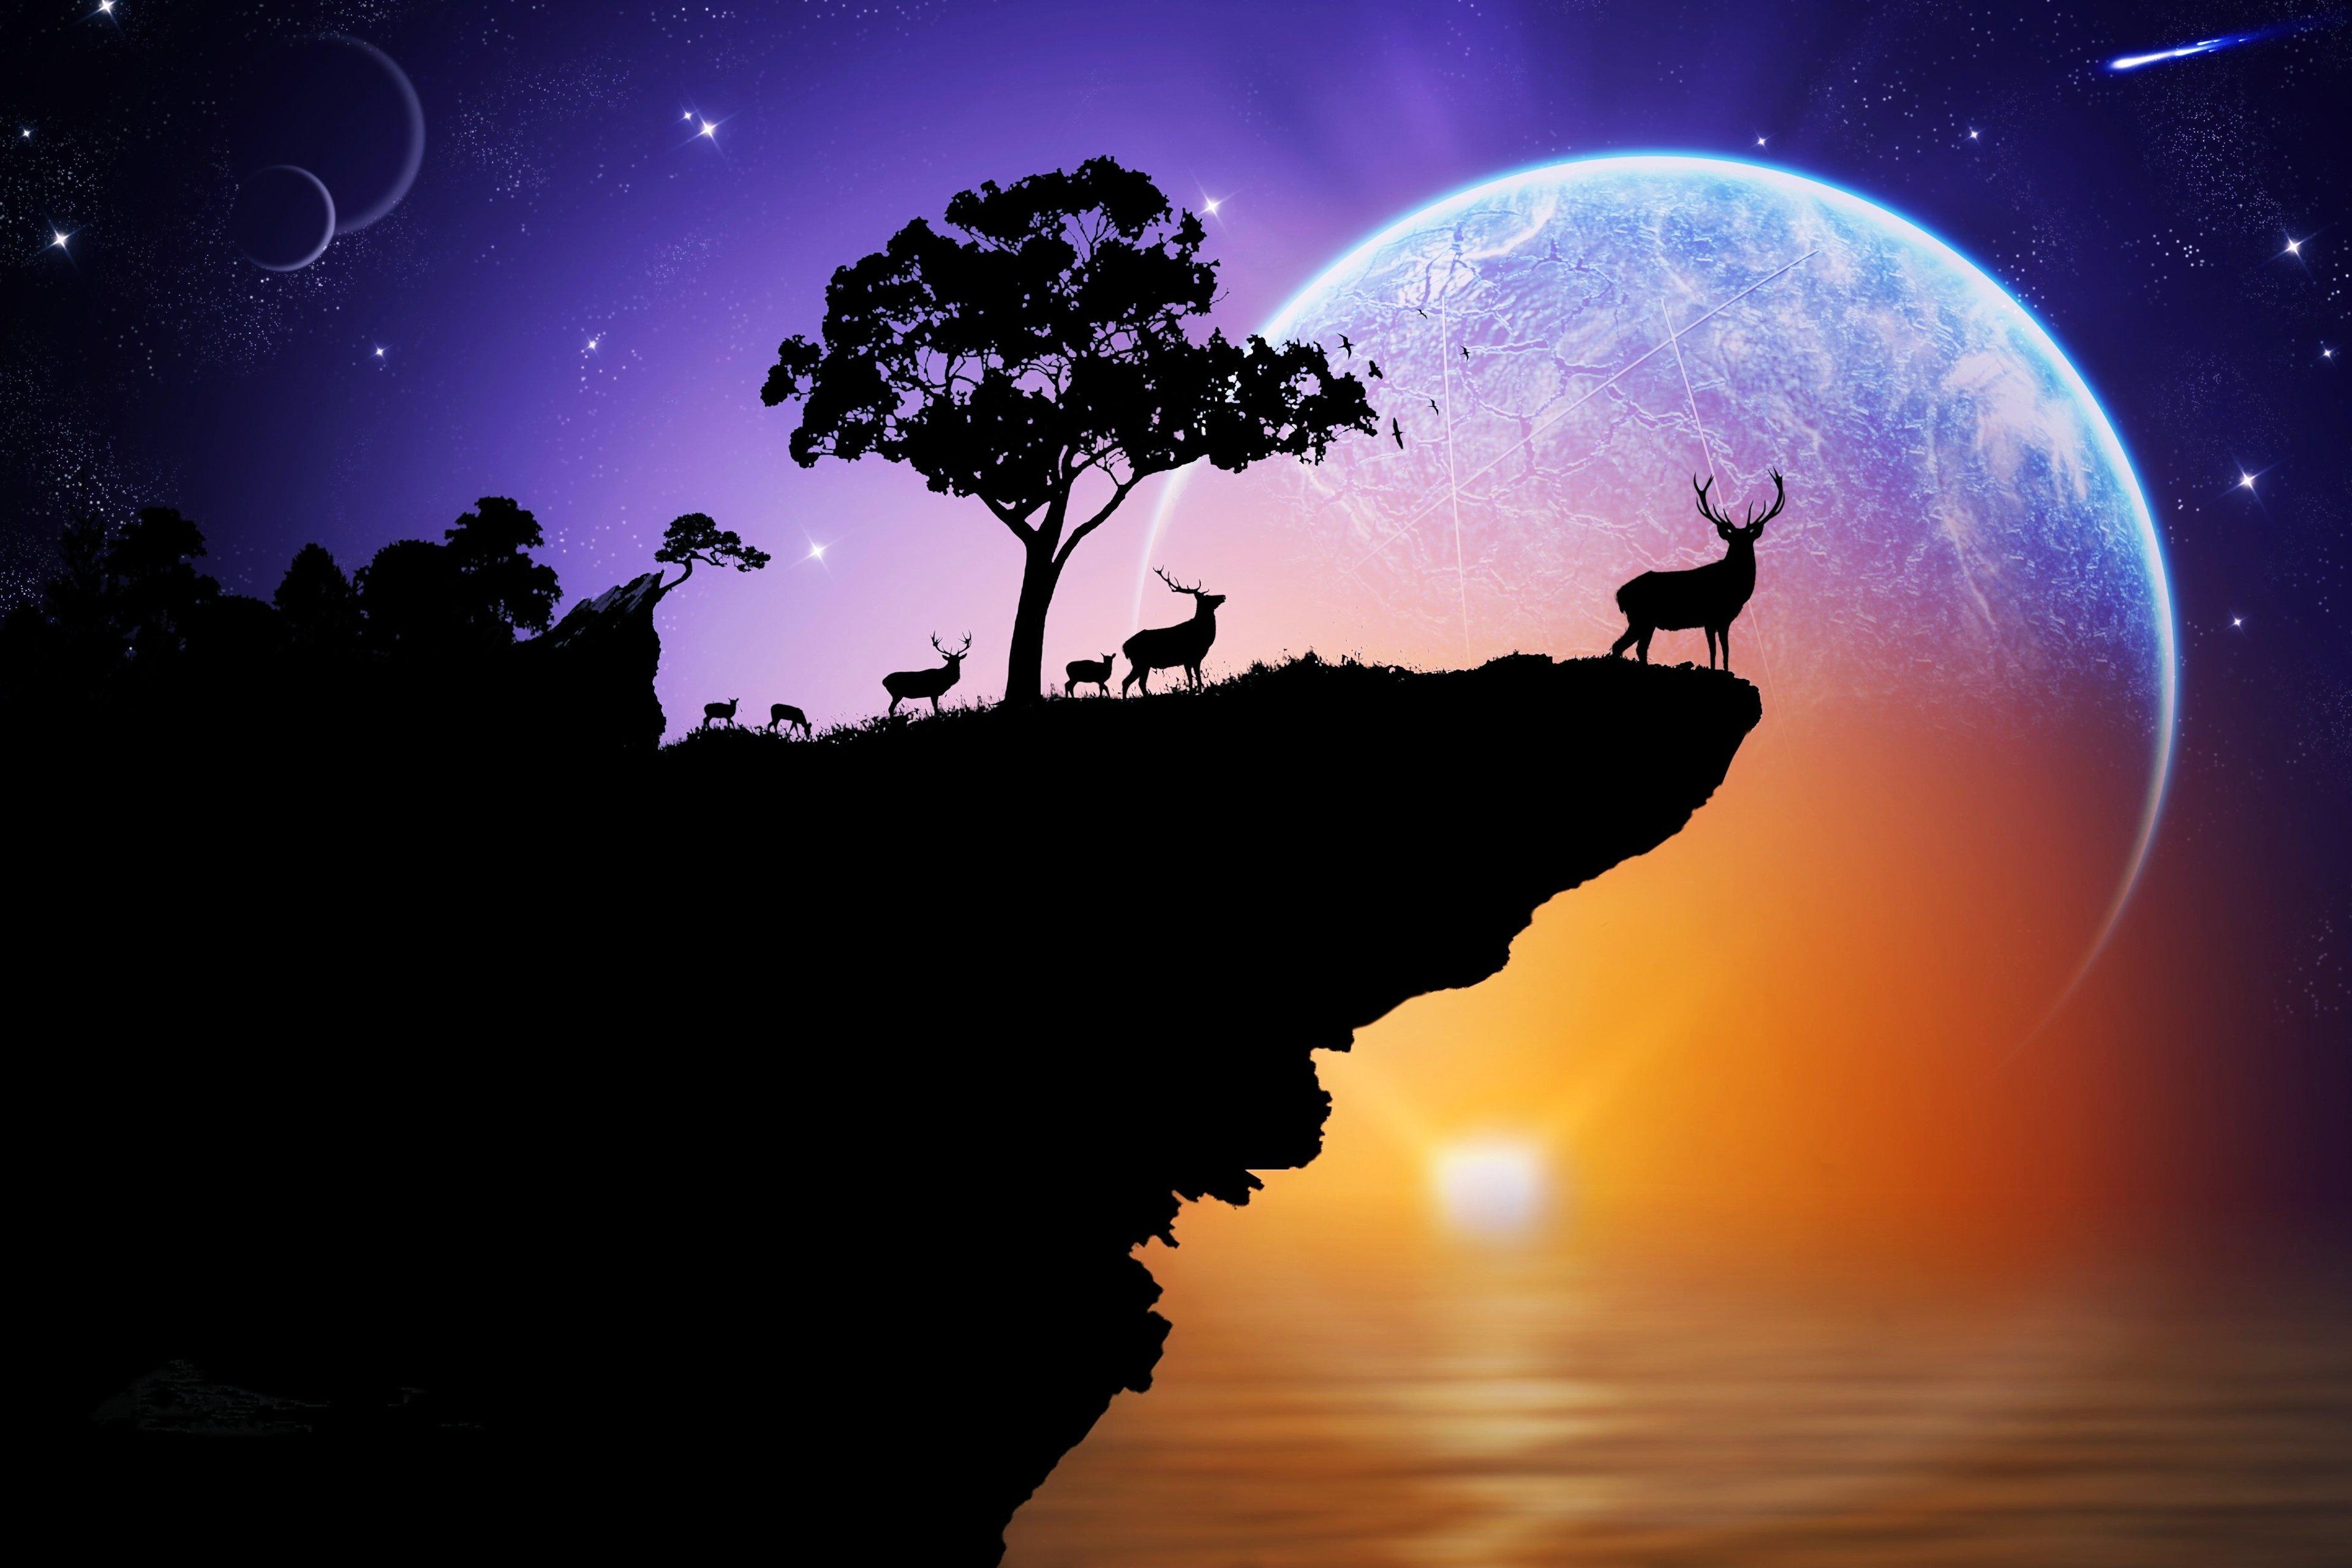 space, Fantasy, Animals, Landscapes, Planets, Sunset, Beauty